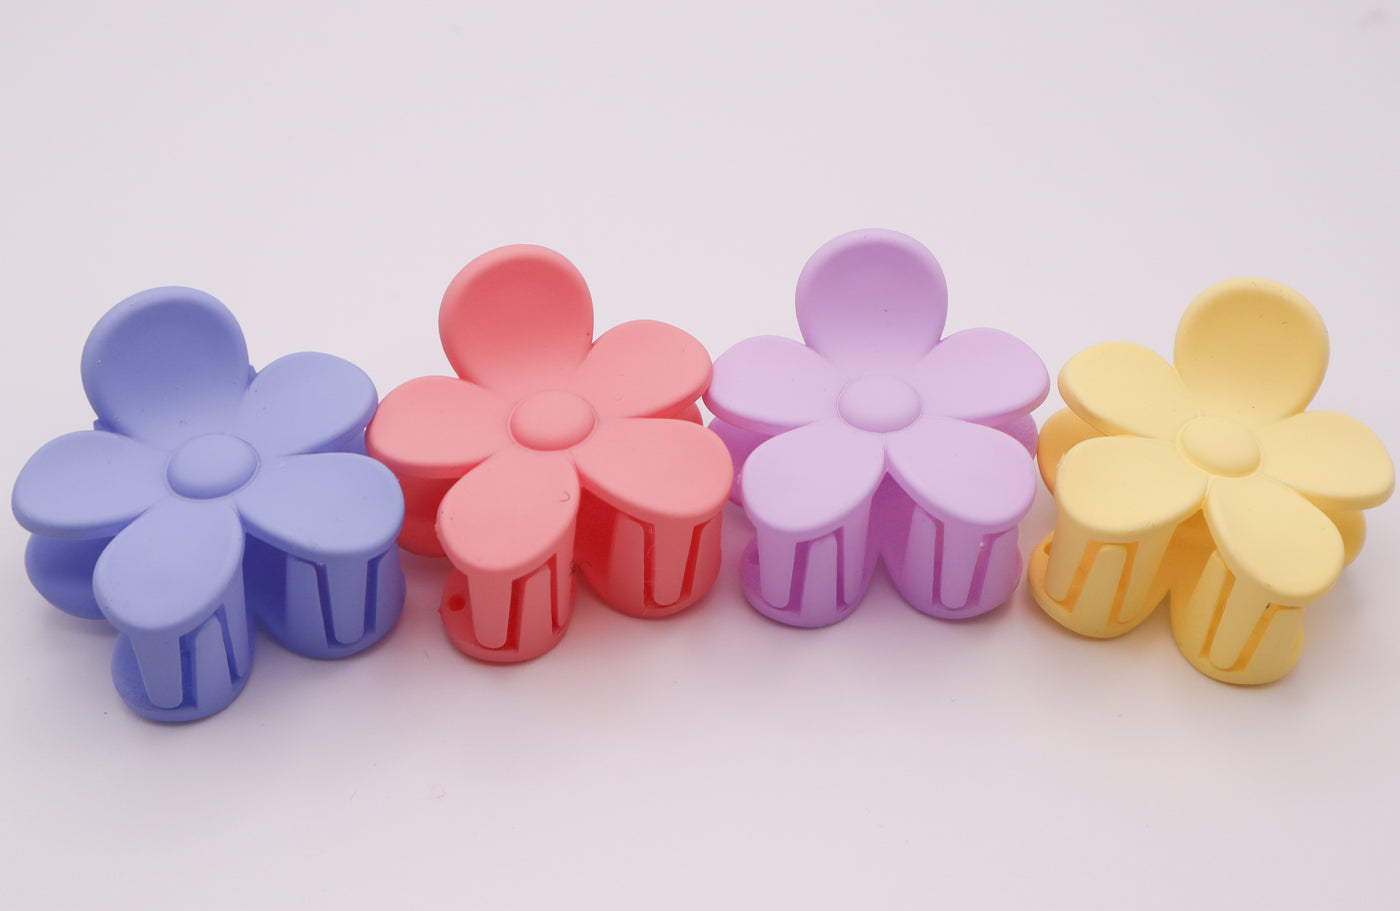 White, pink, and periwinkle, lavender, yellow colored flower small hair clips. Daisy hair clips